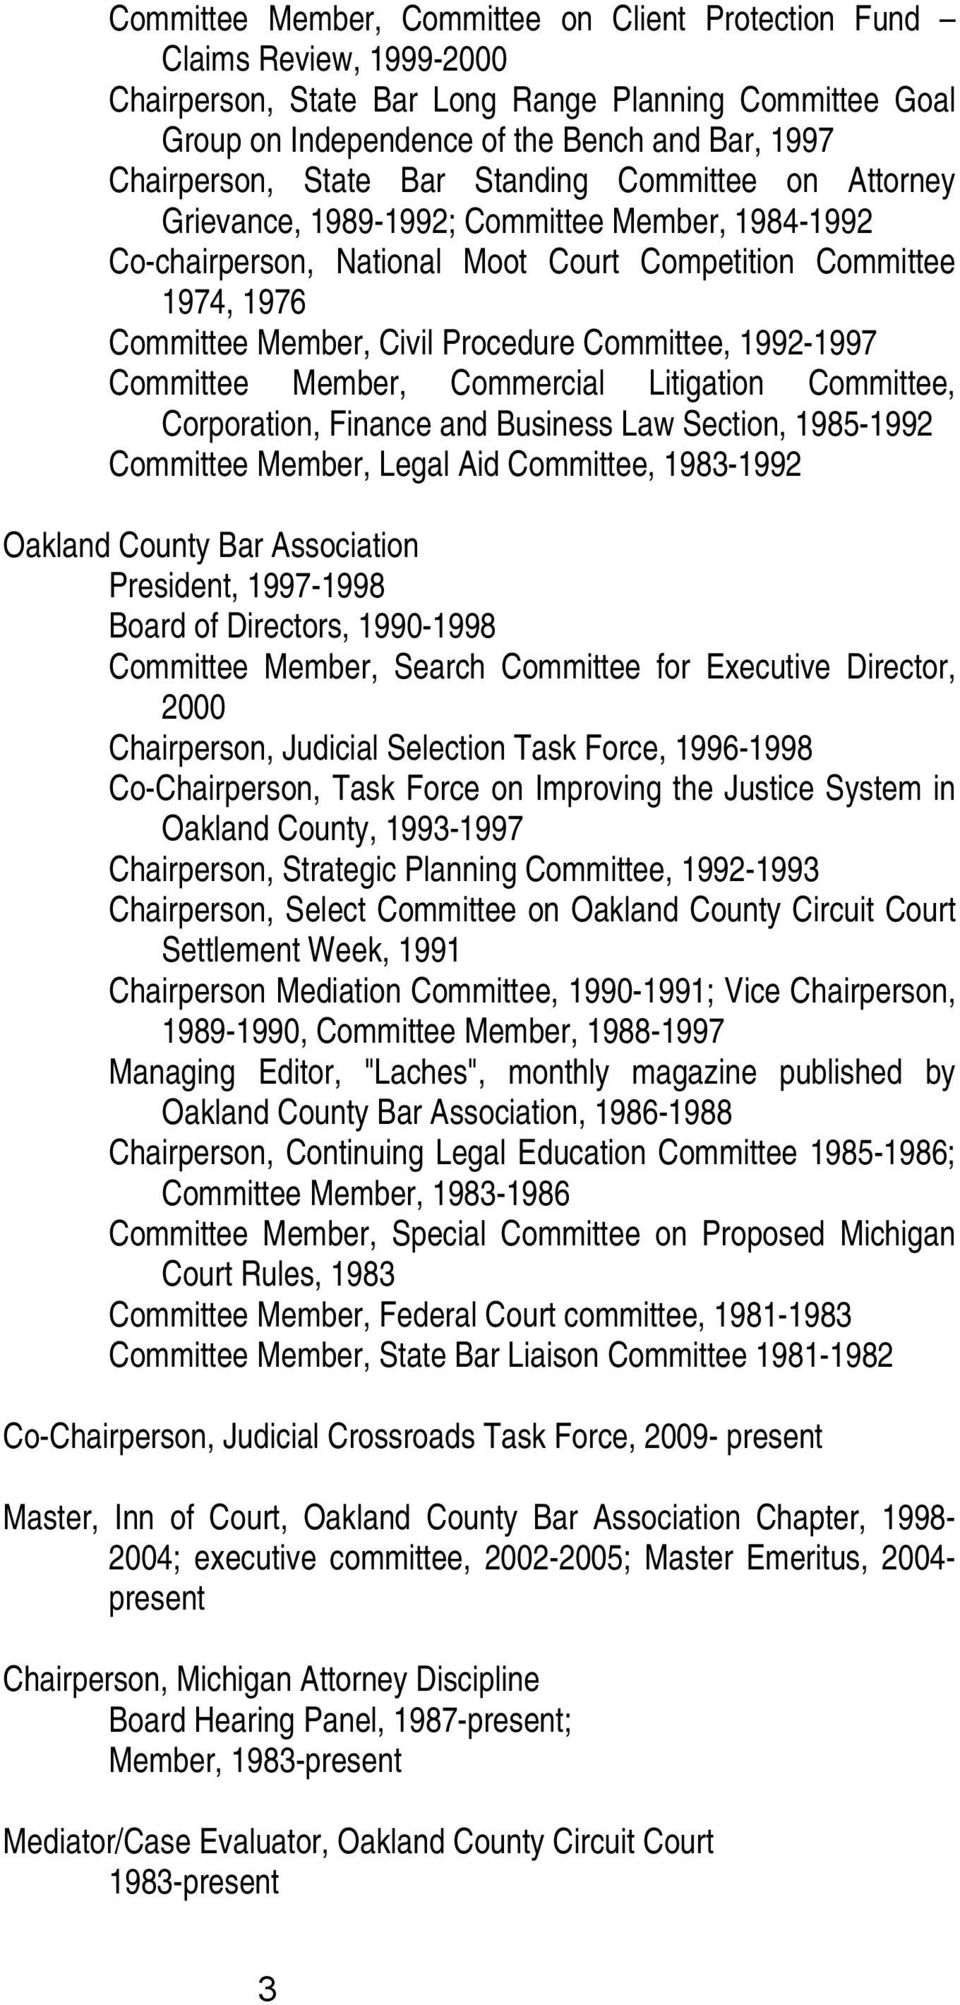 Committee, 1992-1997 Committee Member, Commercial Litigation Committee, Corporation, Finance and Business Law Section, 1985-1992 Committee Member, Legal Aid Committee, 1983-1992 Oakland County Bar